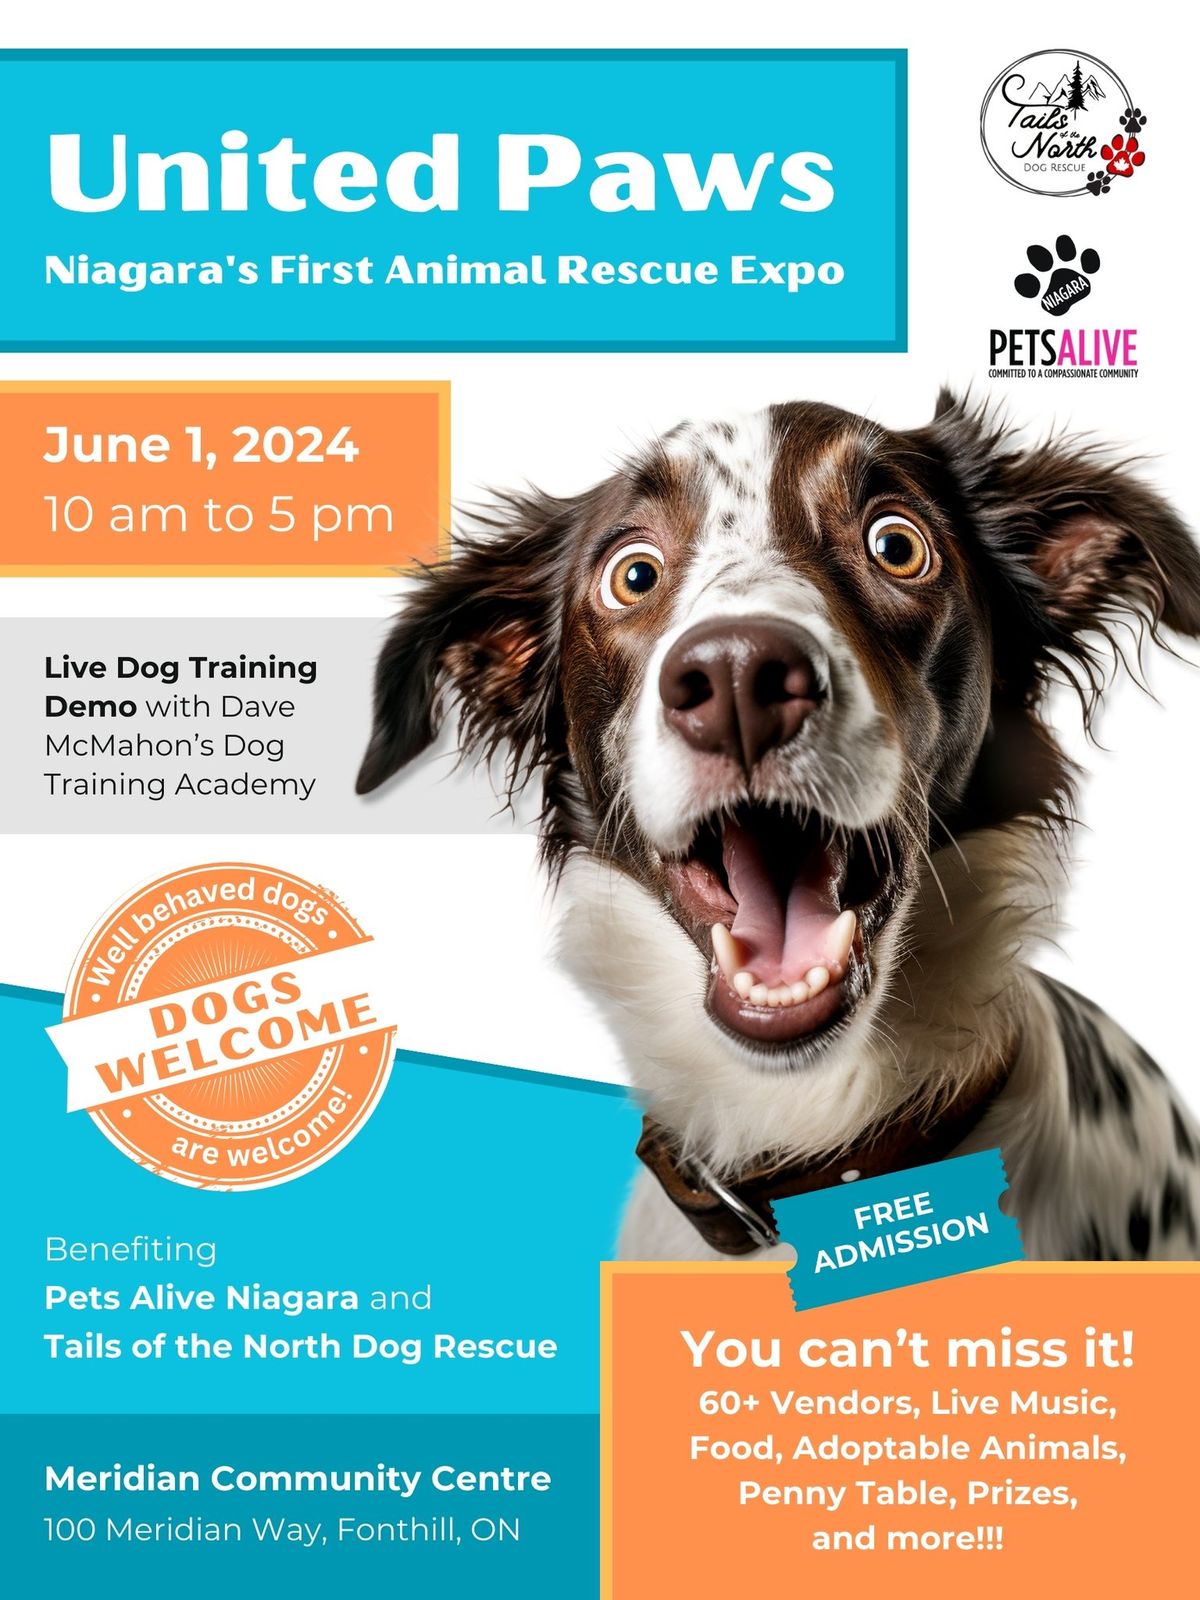 United Paws: Niagara's First Animal Rescue Expo